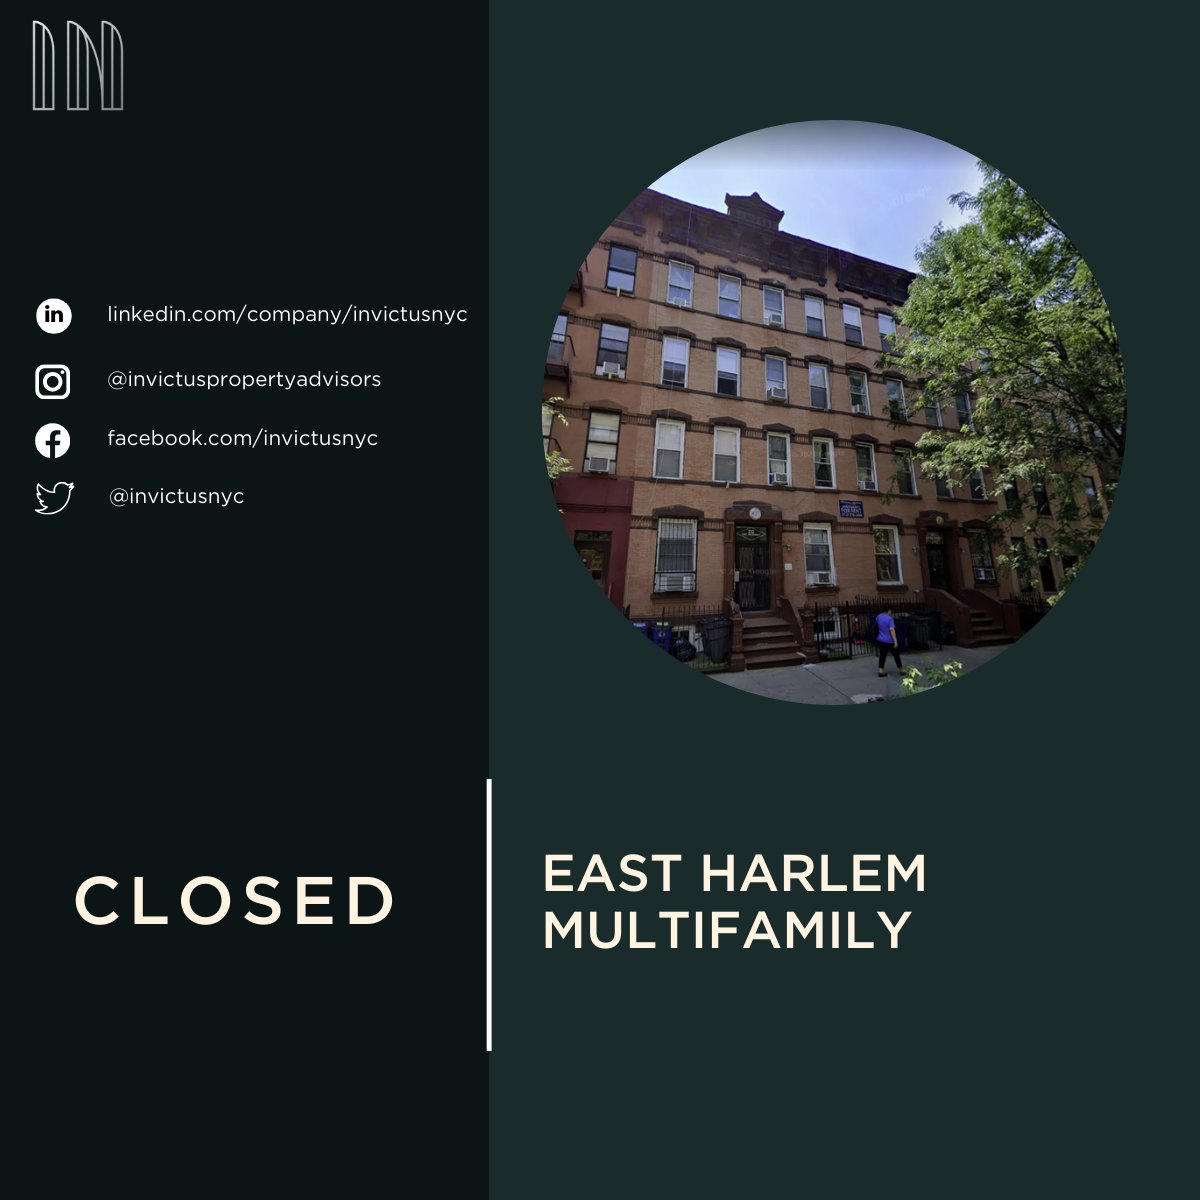 Invictus Property Advisors is pleased to announce the recent sale of two contiguous multifamily buildings located on East 105th Street in East Harlem. 

Contract us to learn more about this transaction.

#RealEstateInvestment #EastHarlem #MultifamilyProperty #invictusnyc